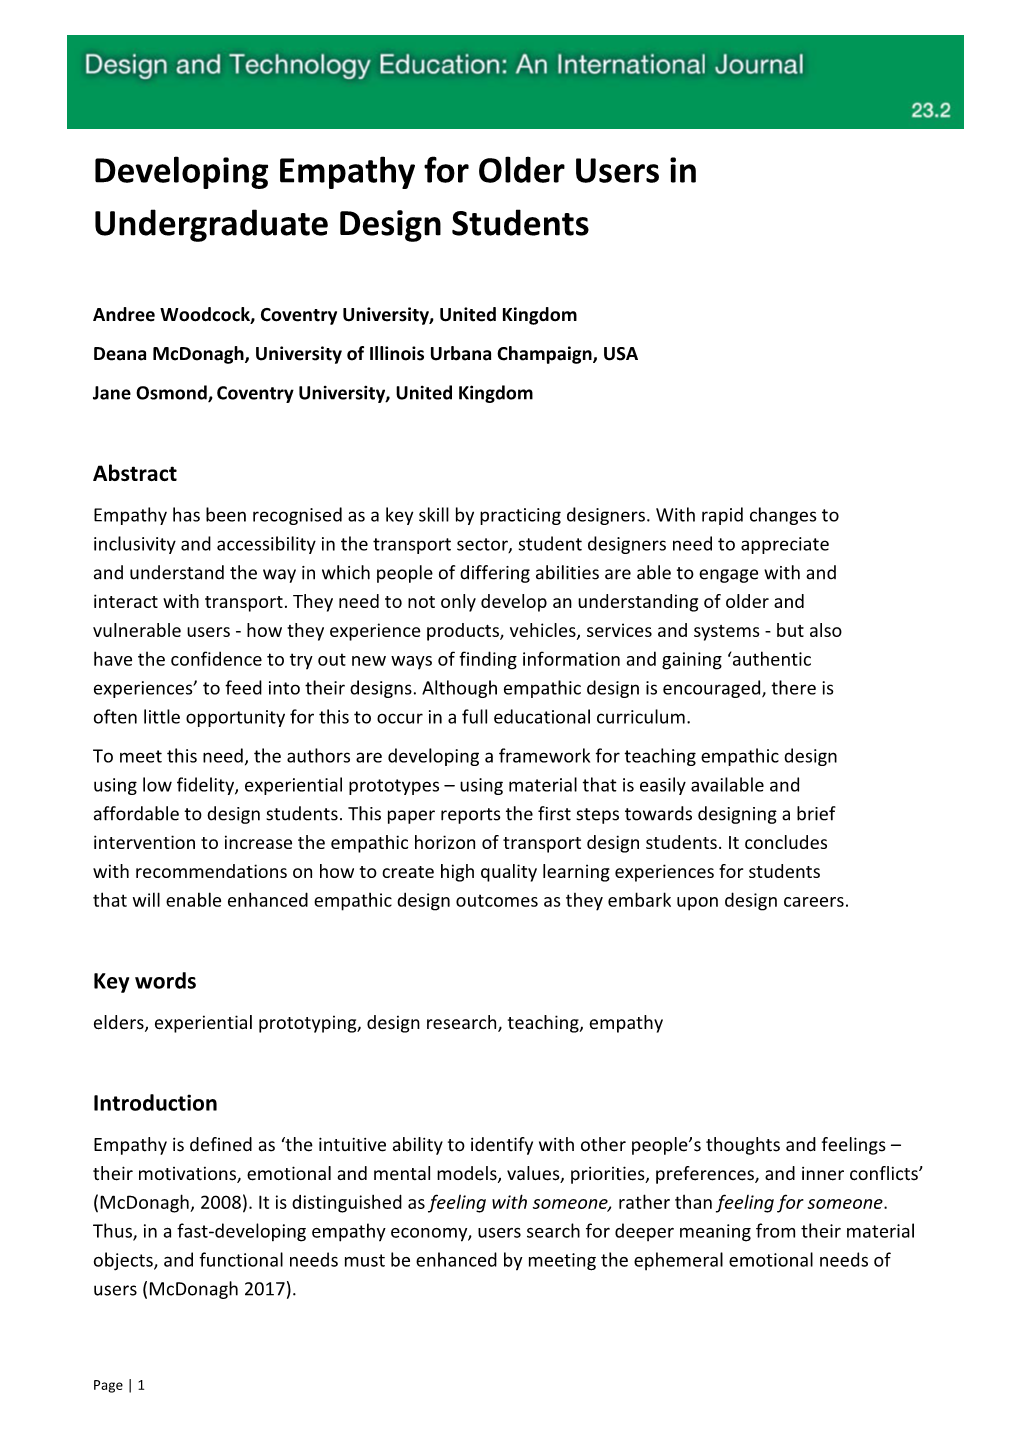 Developing Empathy for Older Users in Undergraduate Design Students